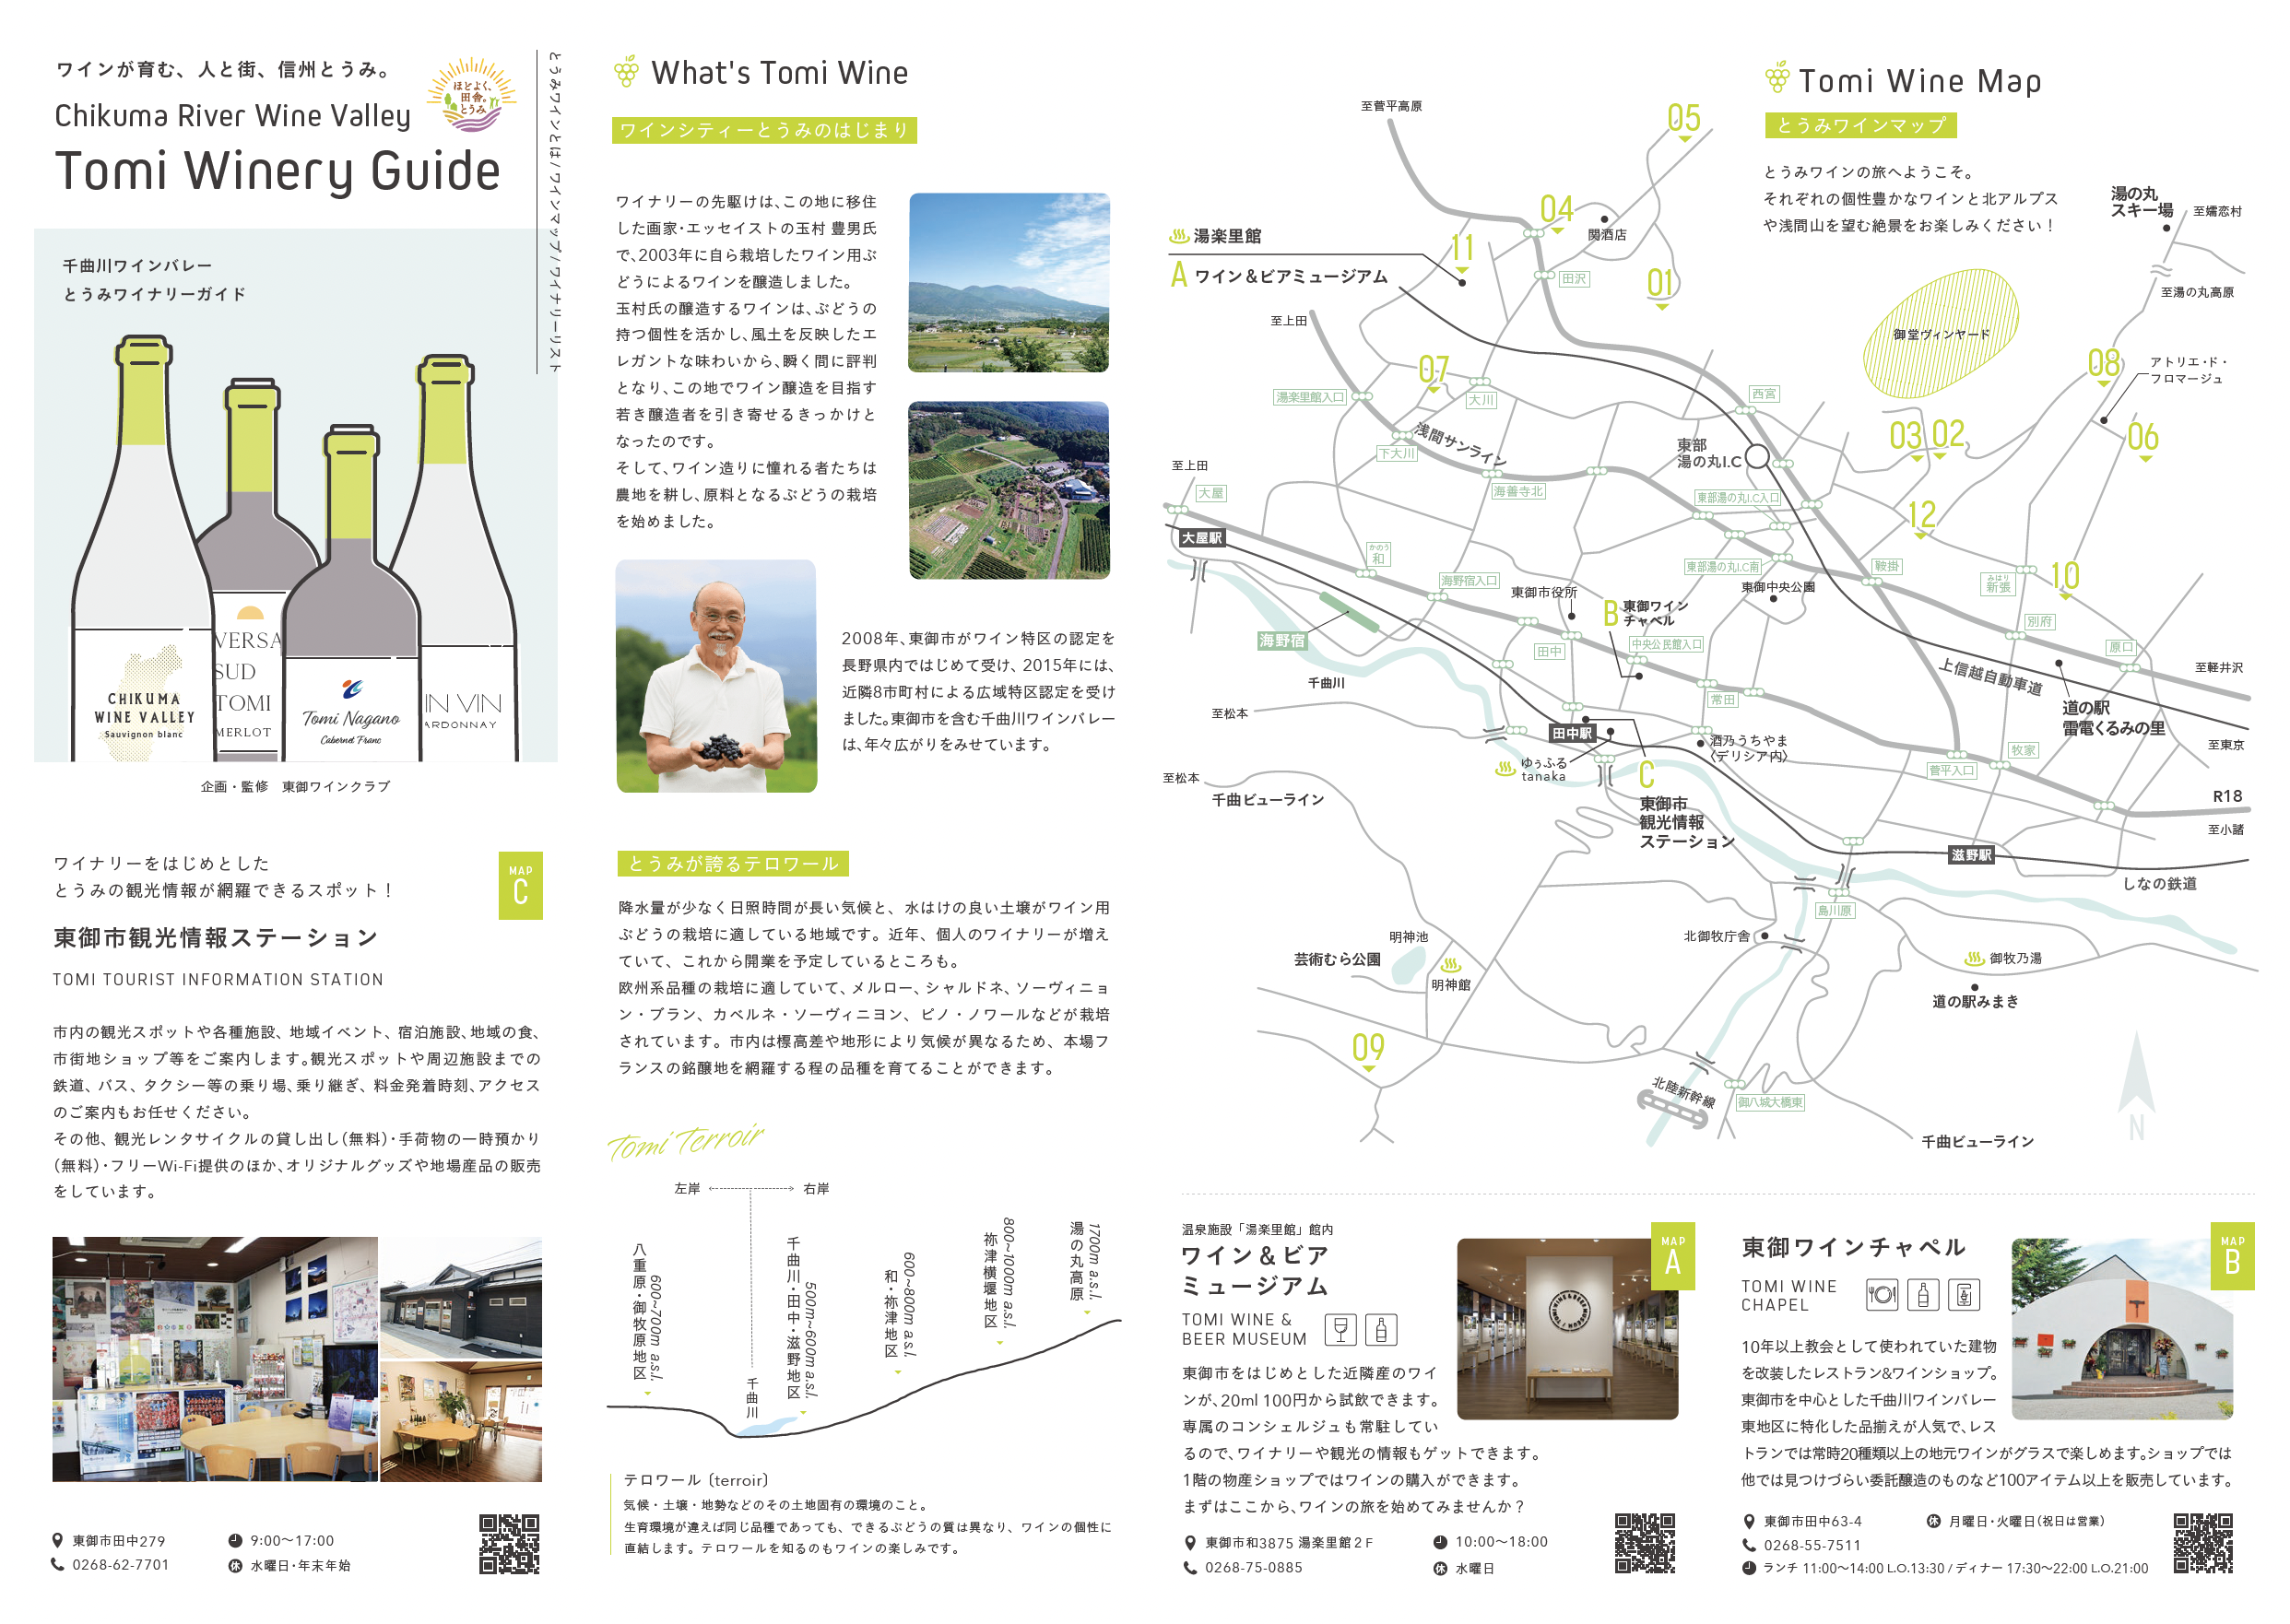 Tomi Winery Guide